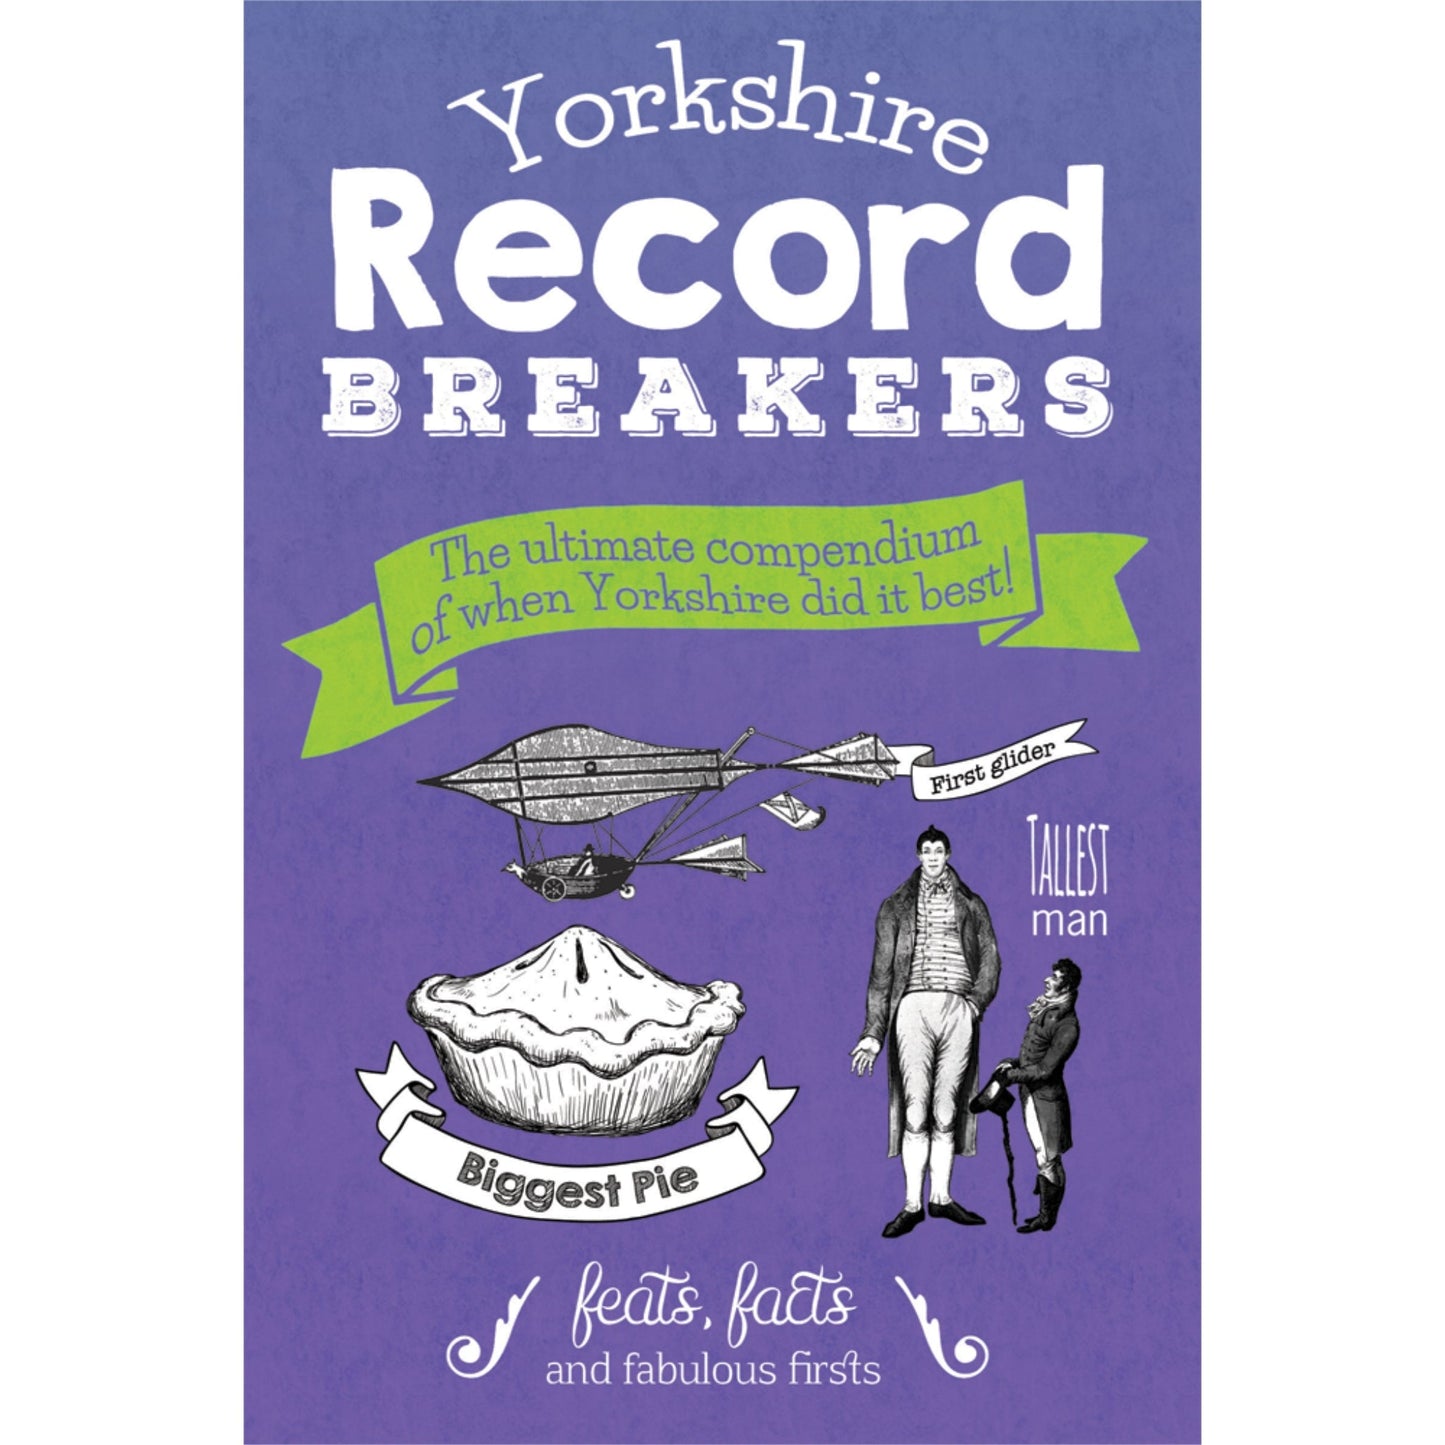 Yorkshire Record Breakers Book - The Great Yorkshire Shop